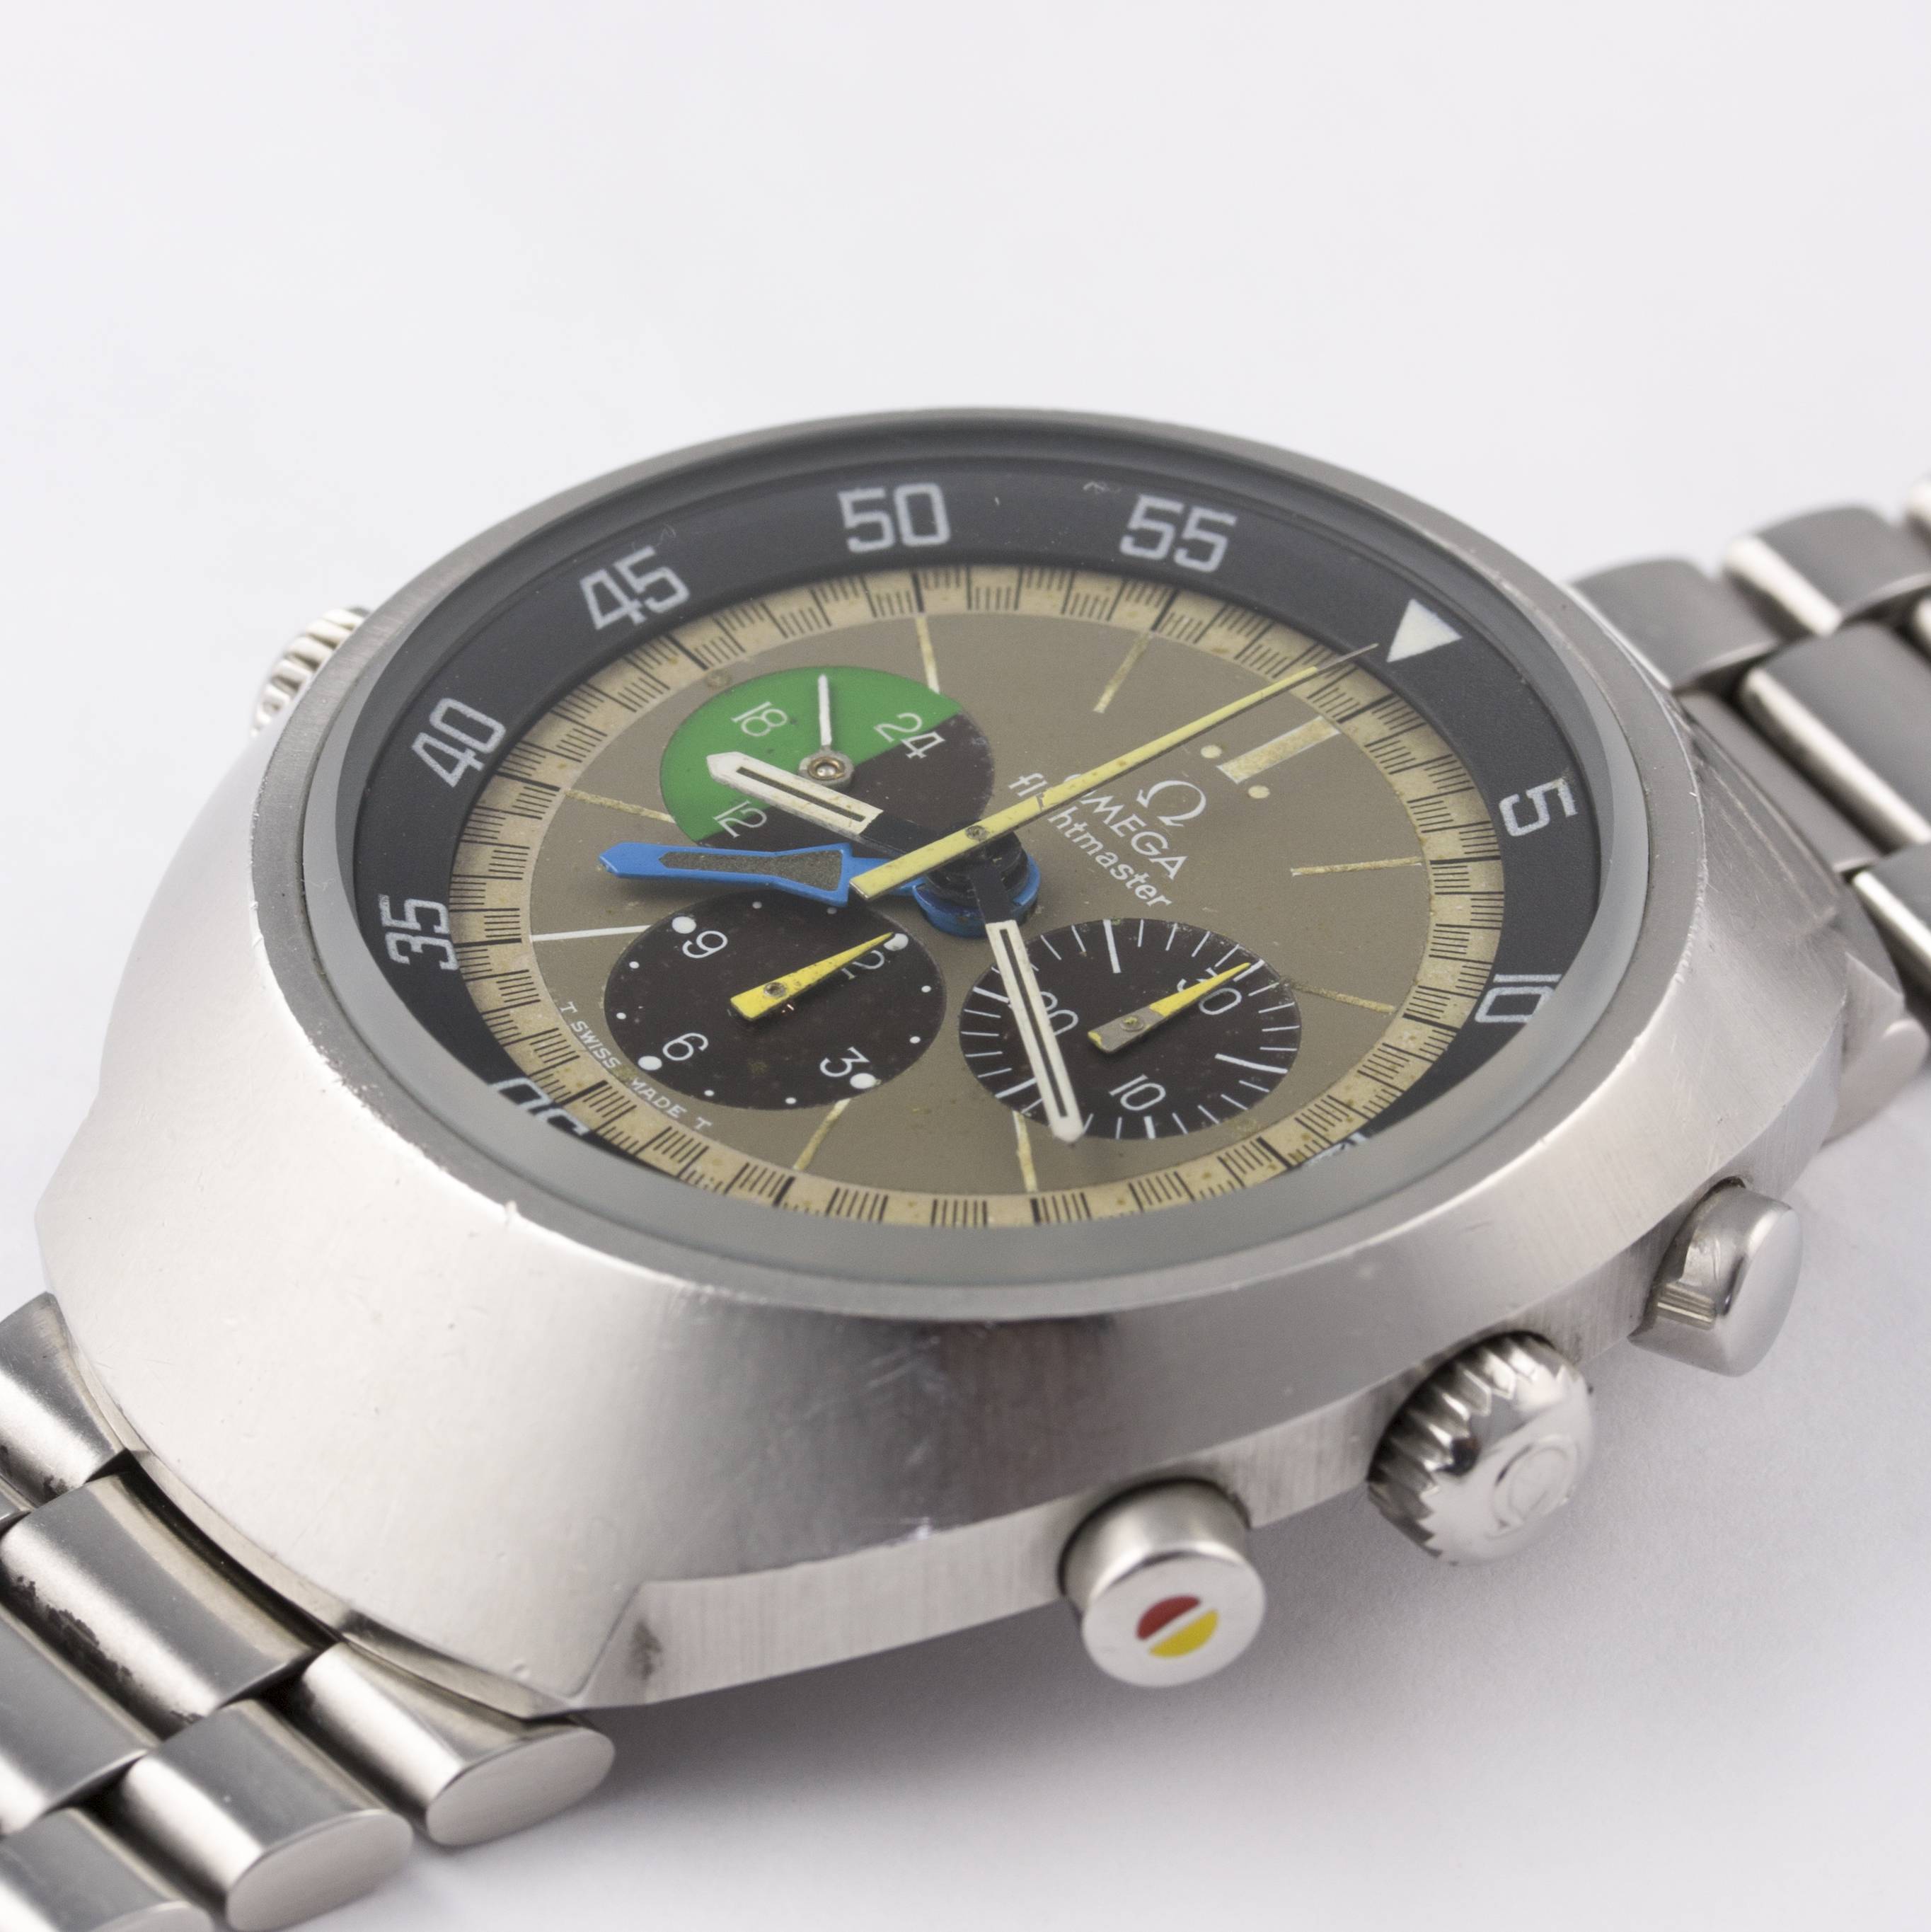 A RARE GENTLEMAN’S STAINLESS STEEL OMEGA FLIGHTMASTER CHRONOGRAPH BRACELET WATCH
CIRCA 1970, REF. 14 - Image 4 of 10